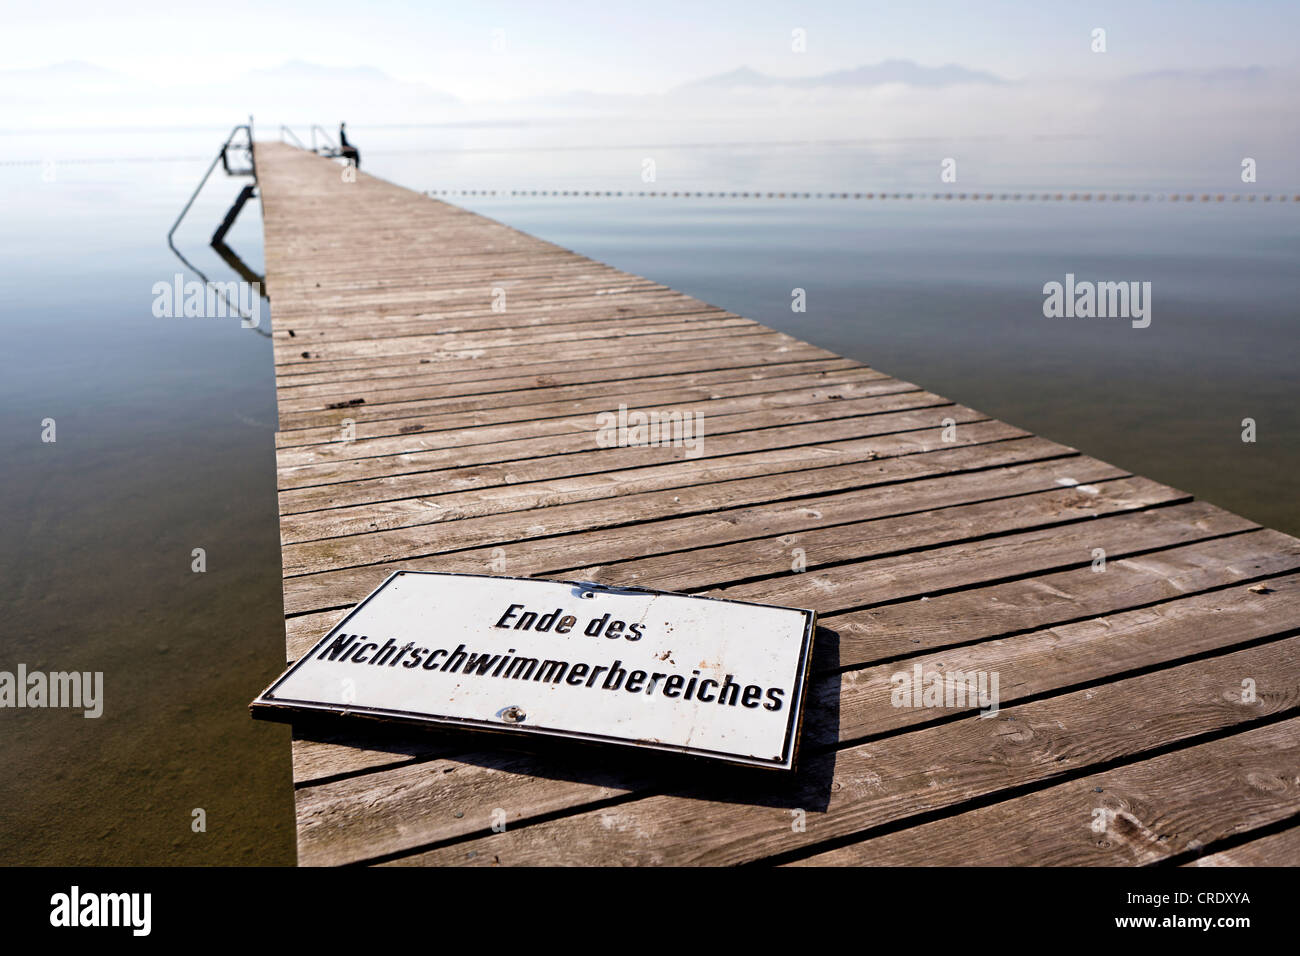 Jetty with a sign 'Ende des Nichtschwimmerbereichs', German for 'end of the non-swimmer area', seated woman at back Stock Photo